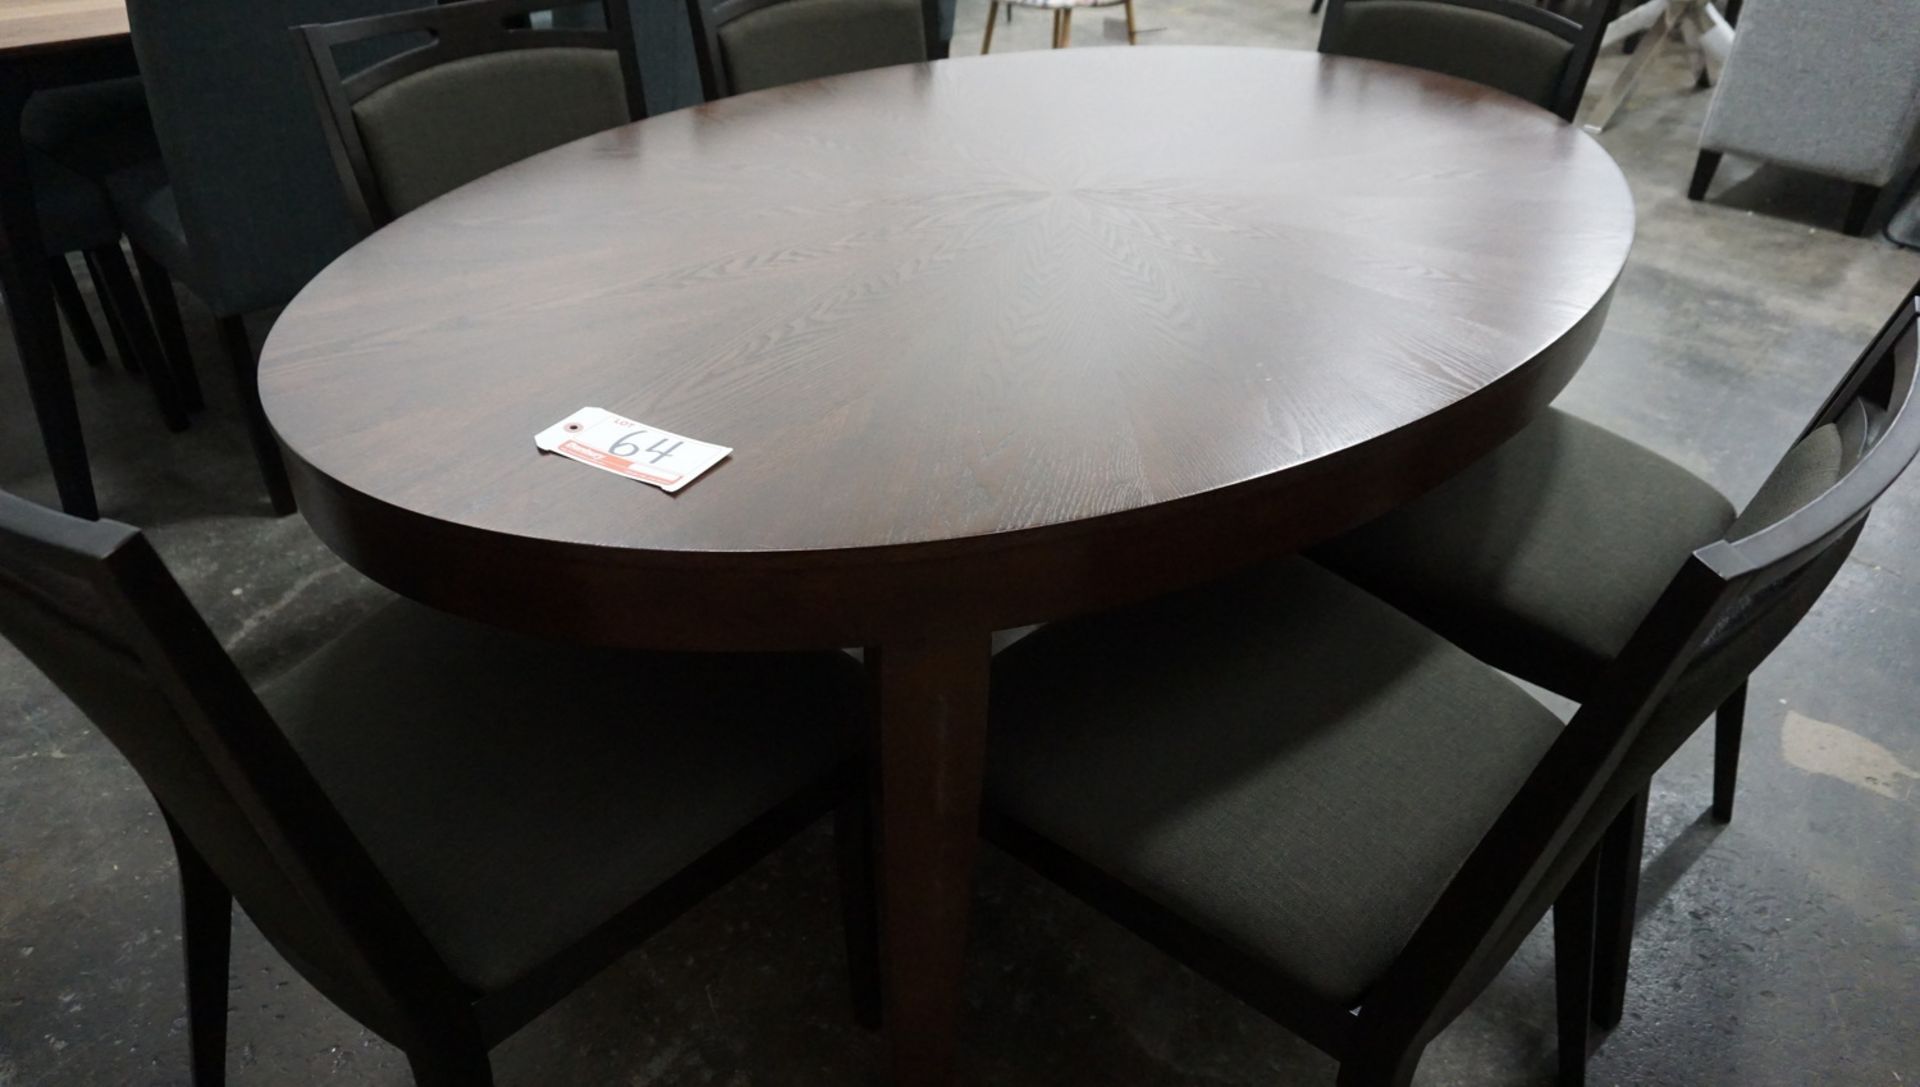 OVAL 67" X 43.5" X 295." DINING TABLE